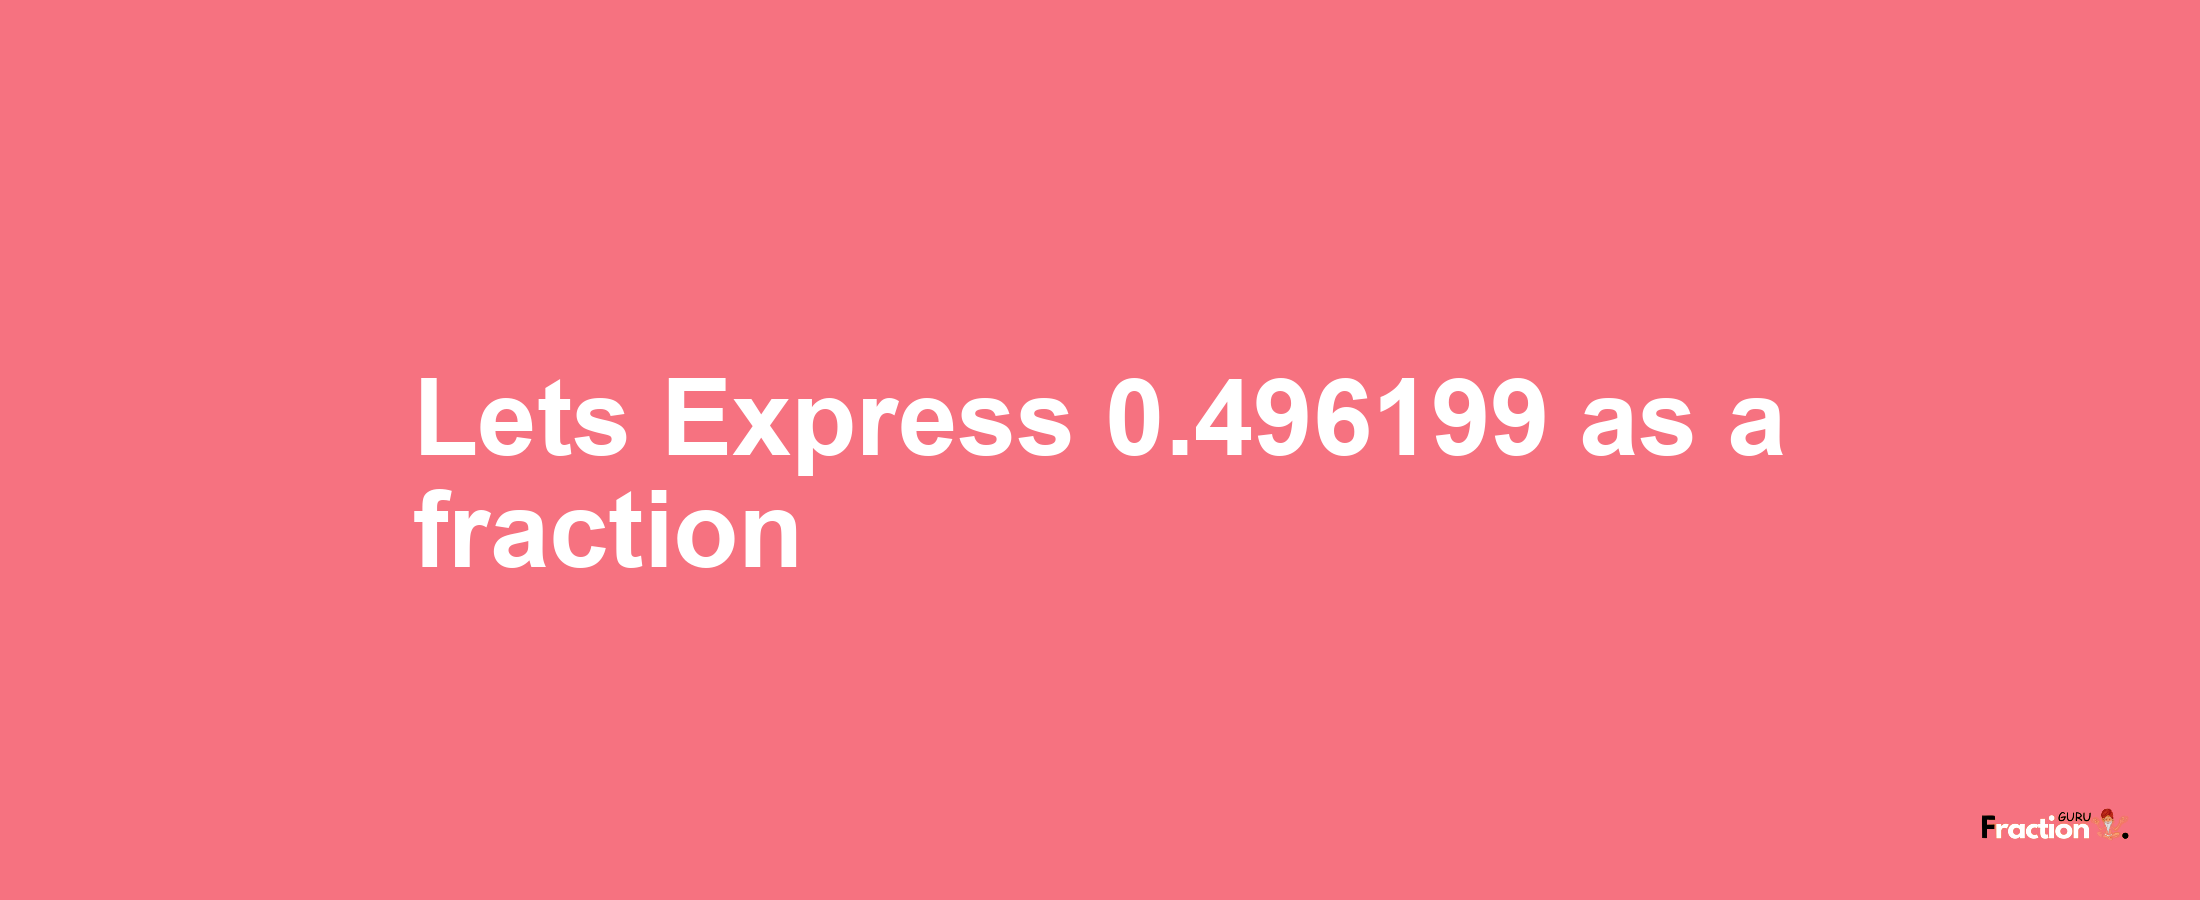 Lets Express 0.496199 as afraction